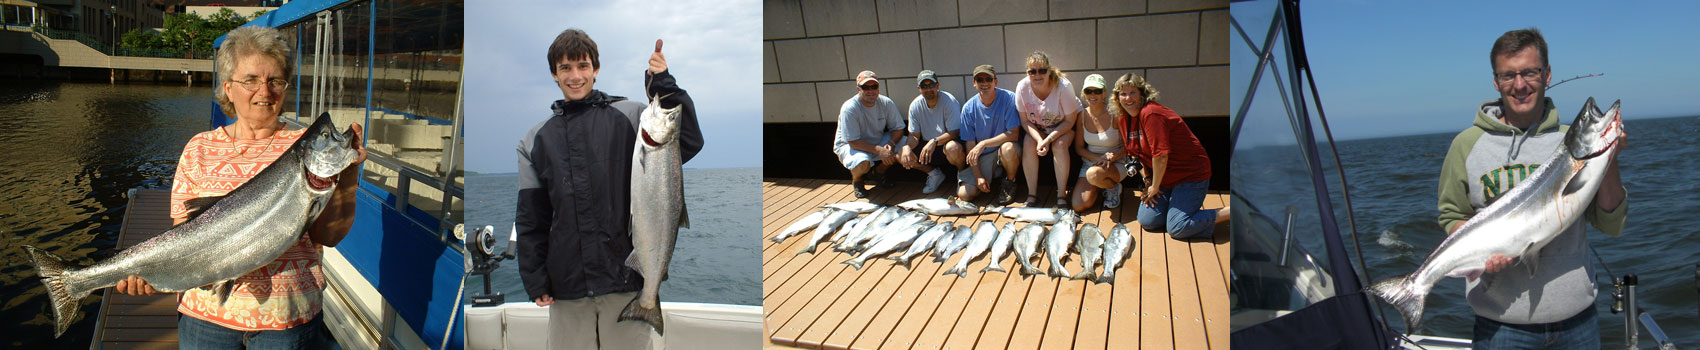 Charter Fishing - Charter fishing in Milwaukee holds more state and world record fish than any other port. Discover the fun of trophy Coho and King Salmon or Lake Brown and Rainbow Trout fishing